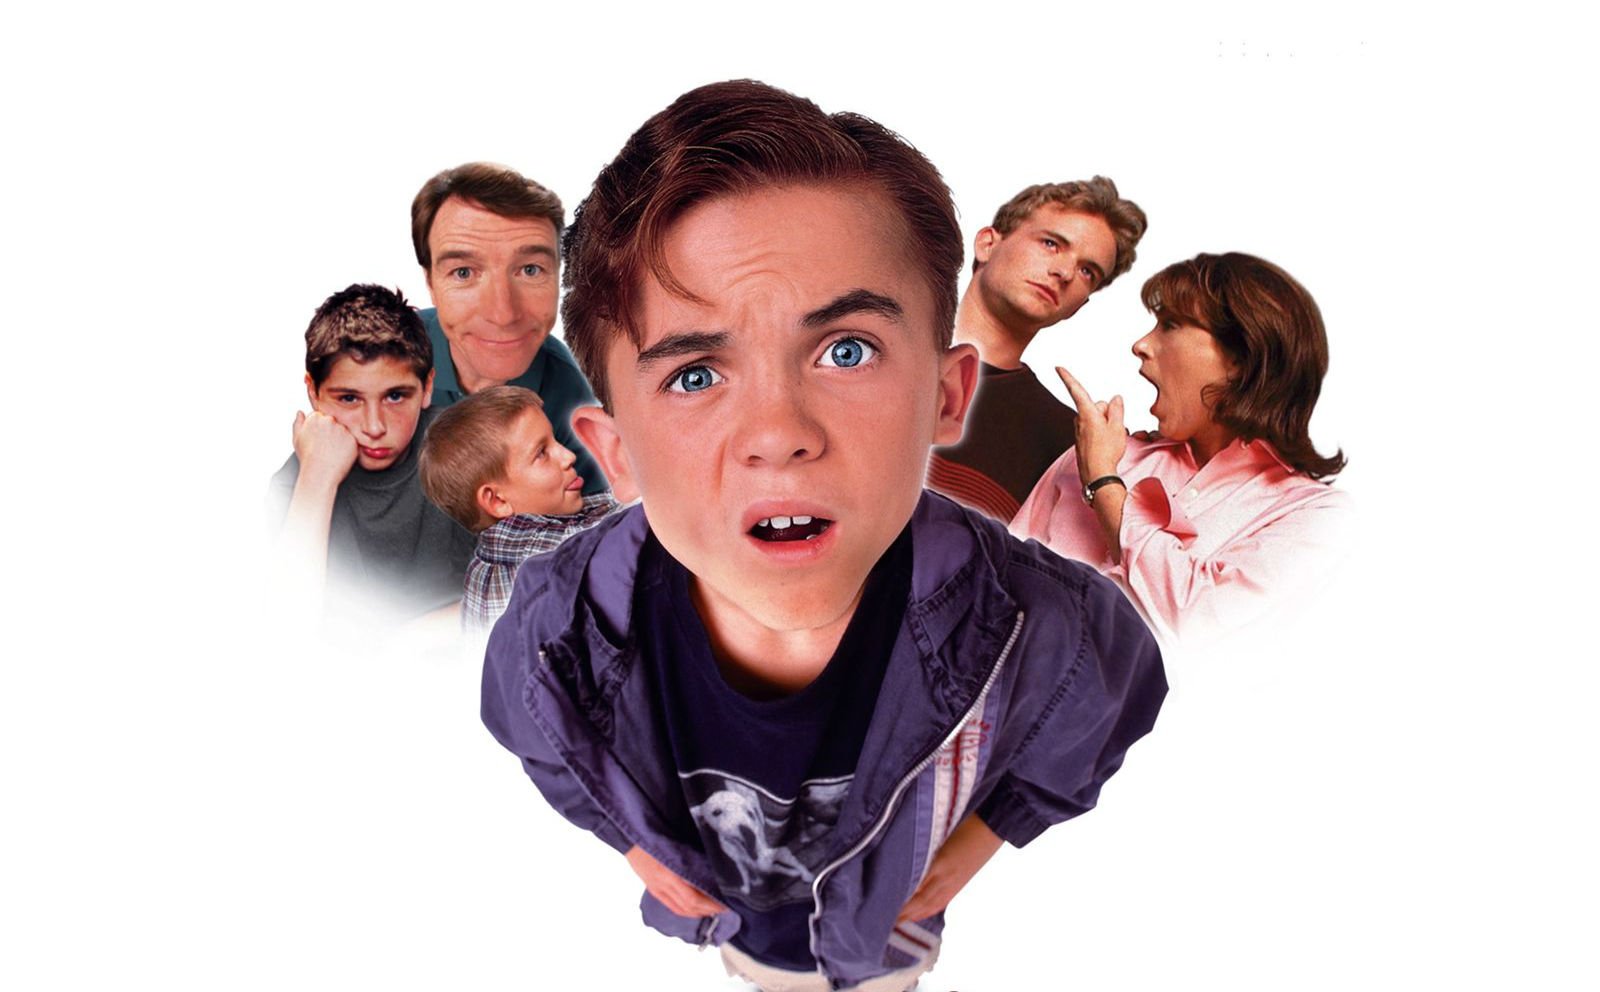 malcolm in the middle